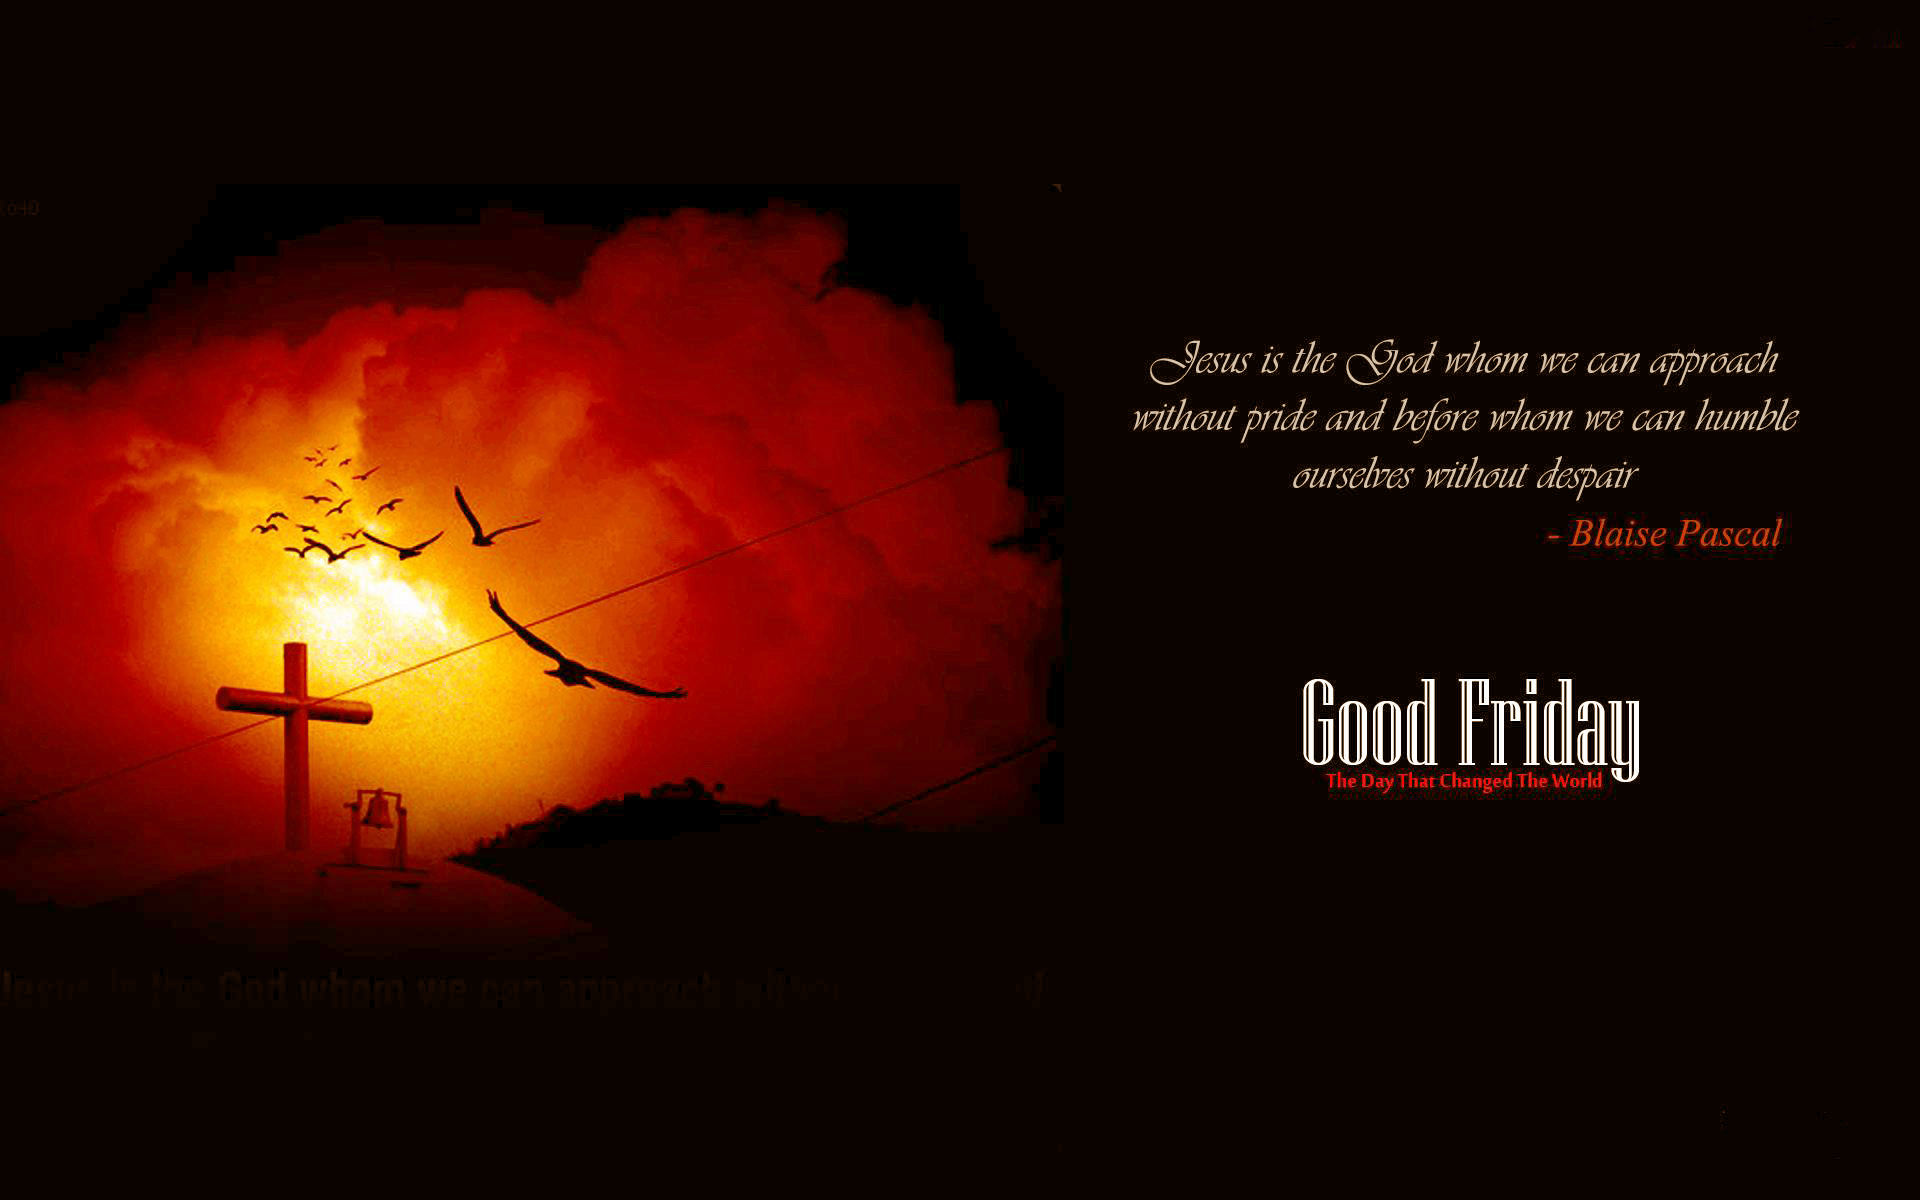 Good Friday Message Quote Blaise Pascal 4k Ultra HD Pc